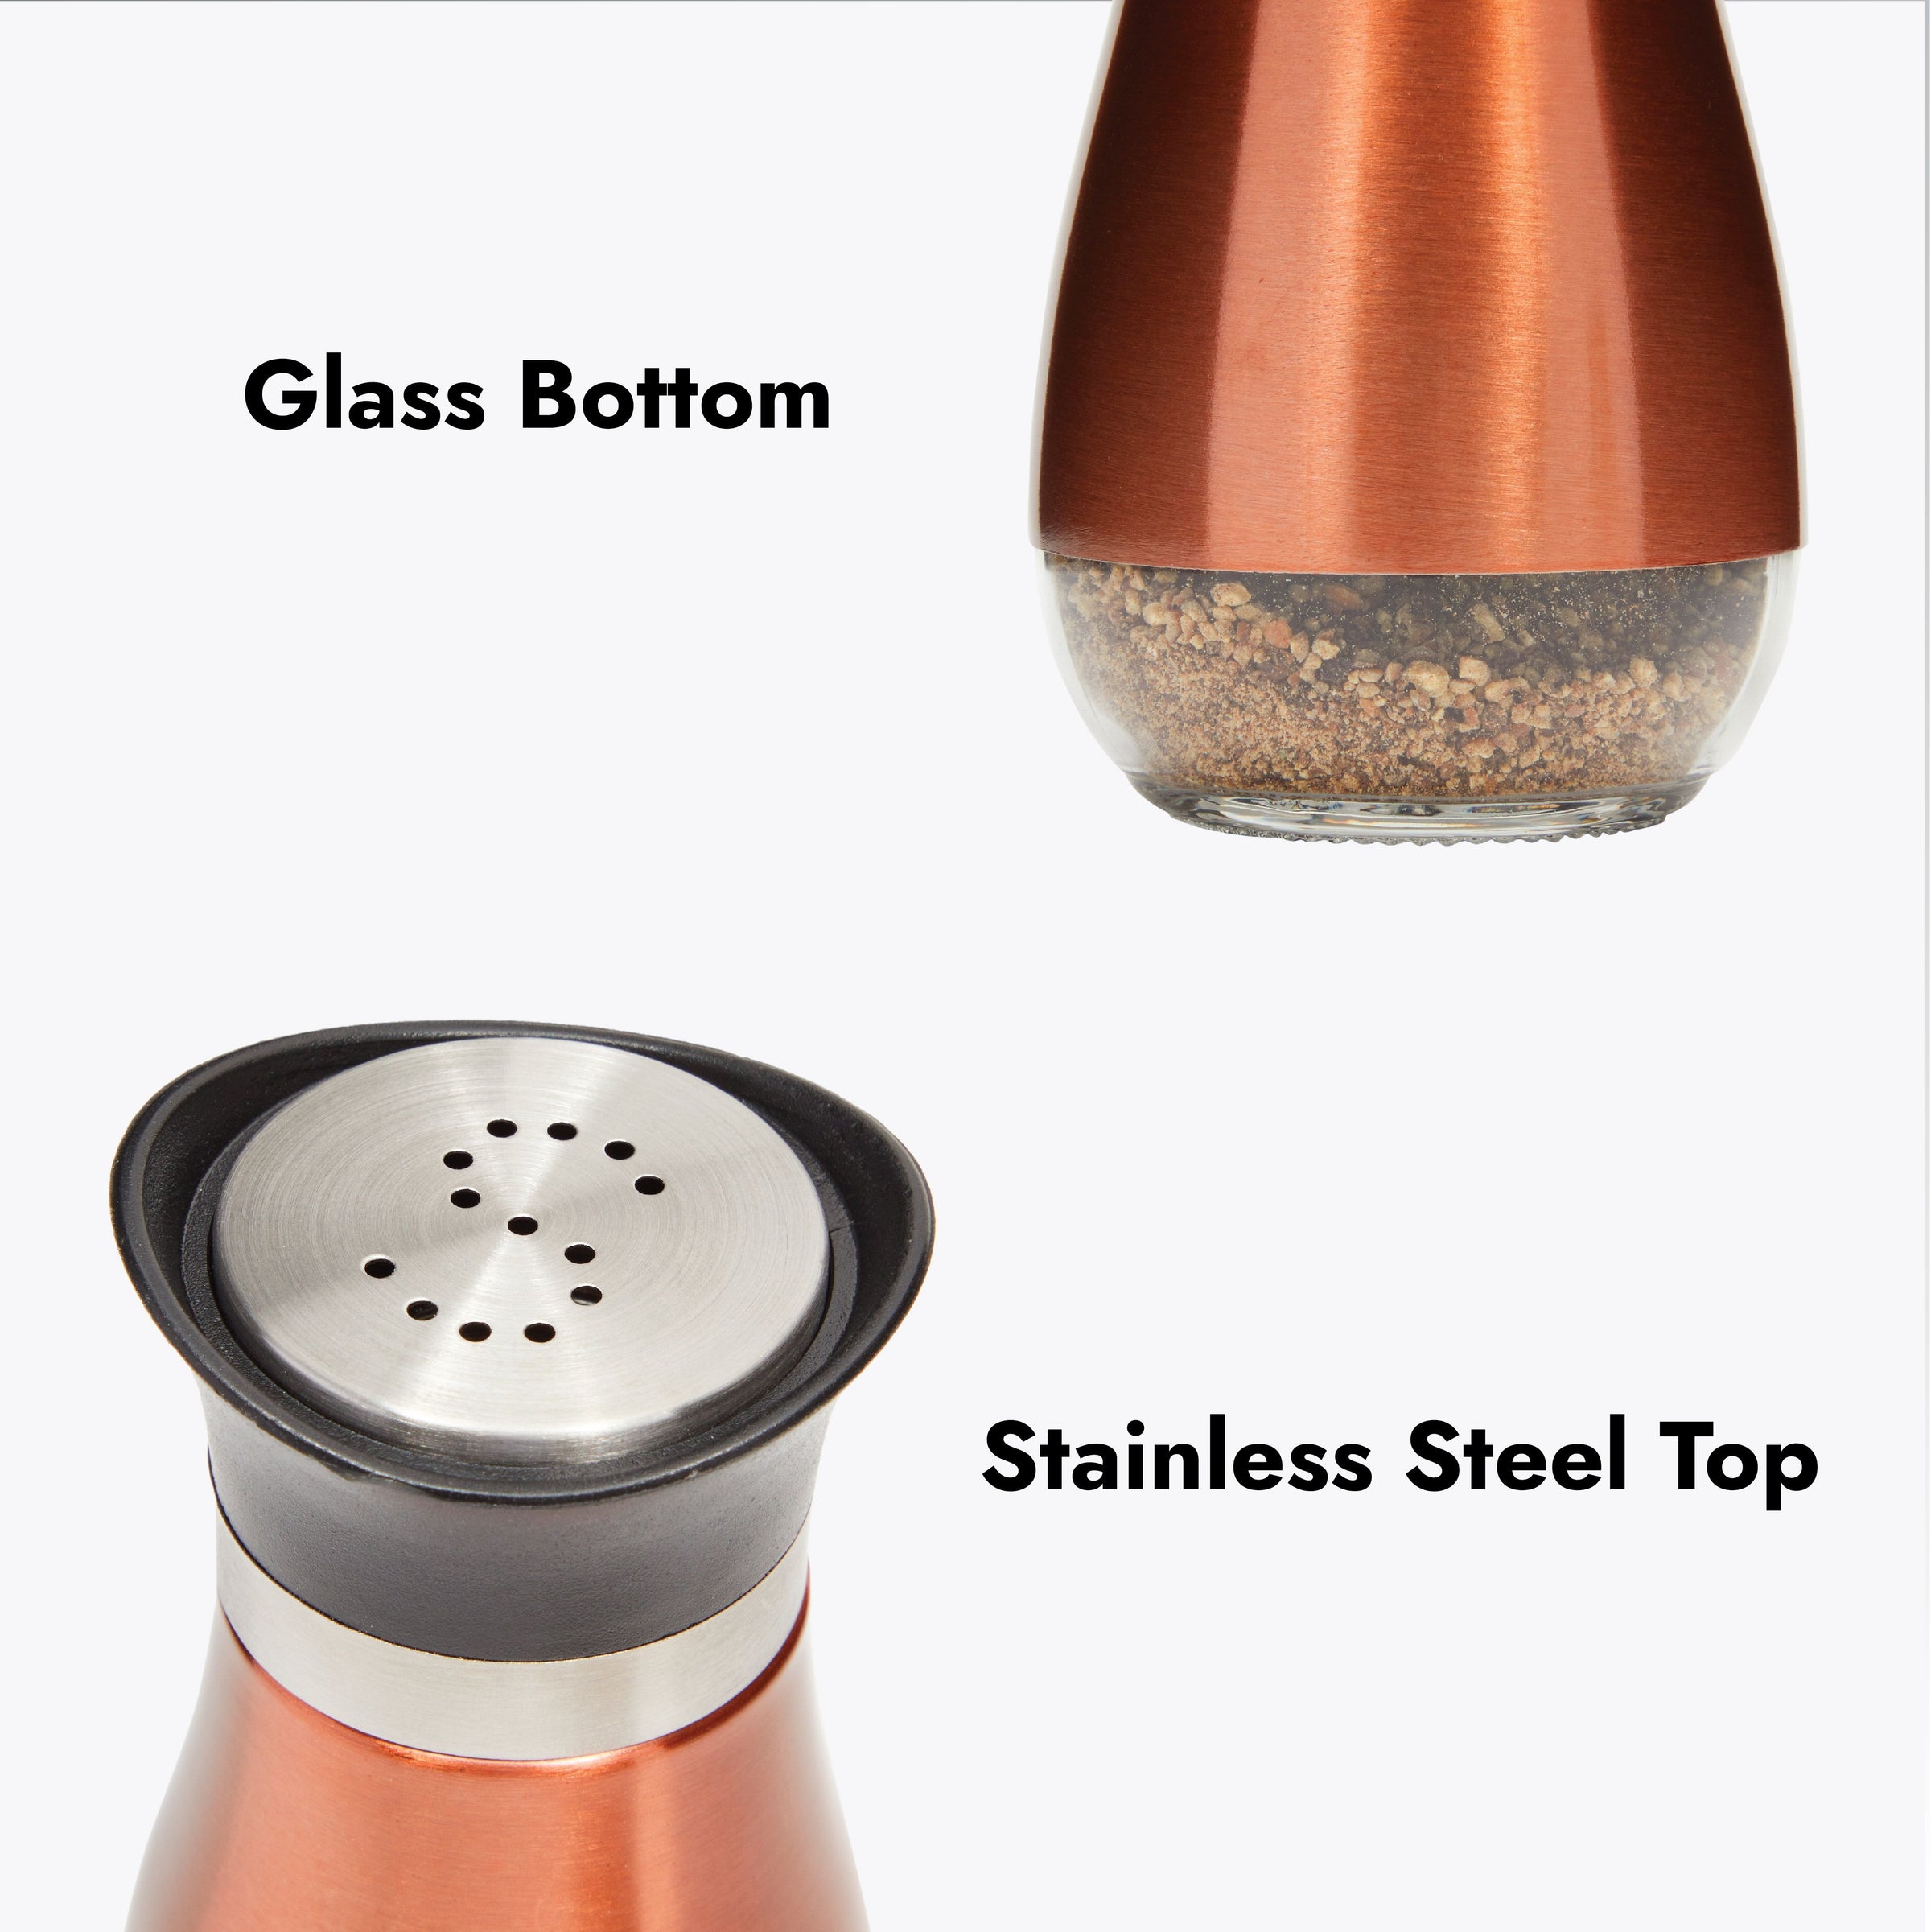 Juvale Salt and Pepper Shakers Stainless Steel Glass Set